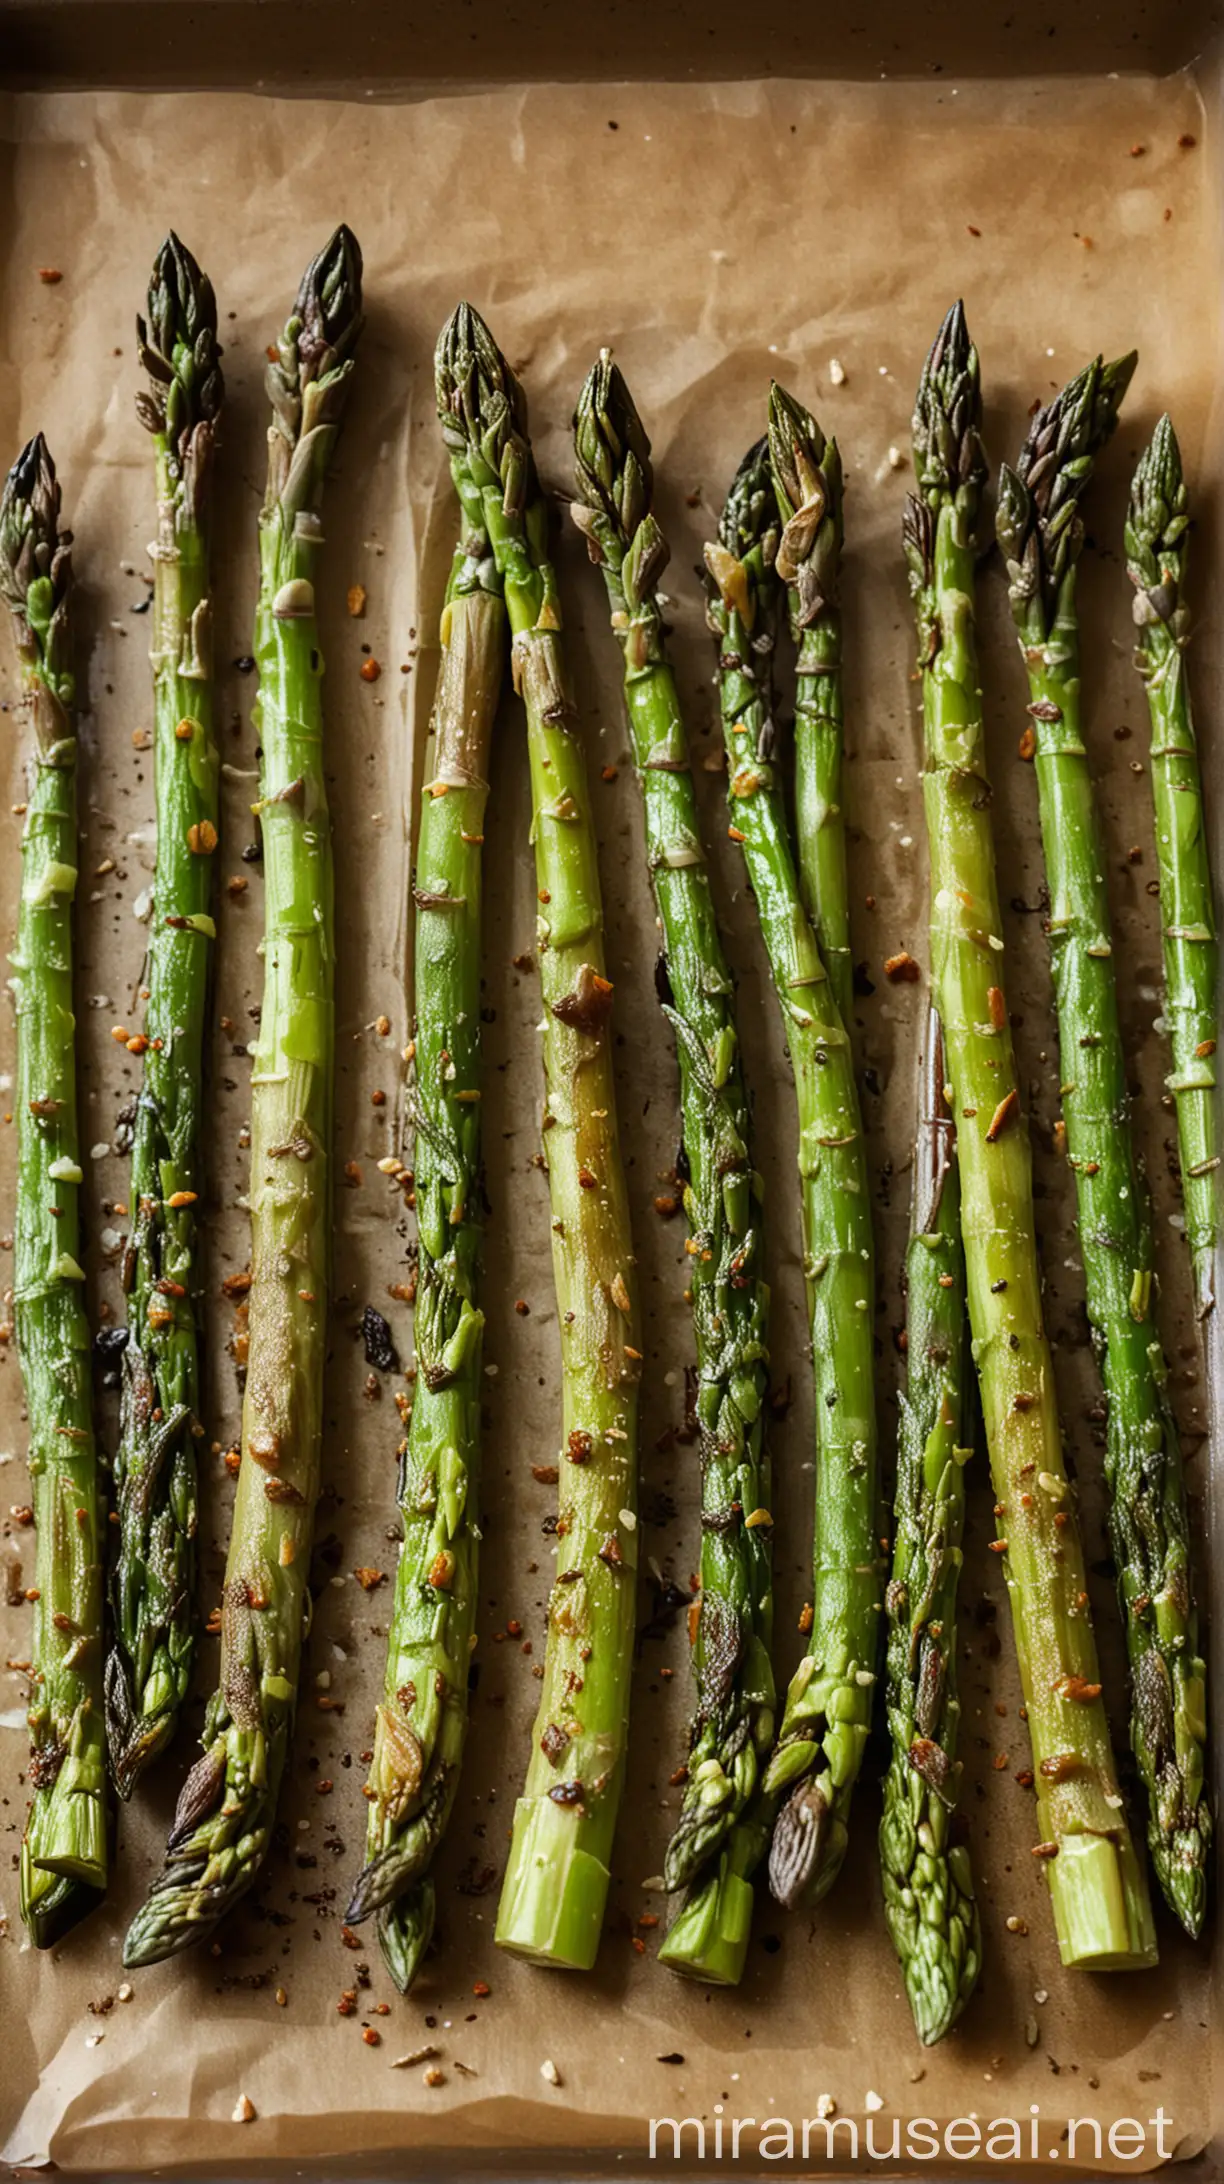 Delicious Roasted Asparagus Tips on Rustic Wooden Platter